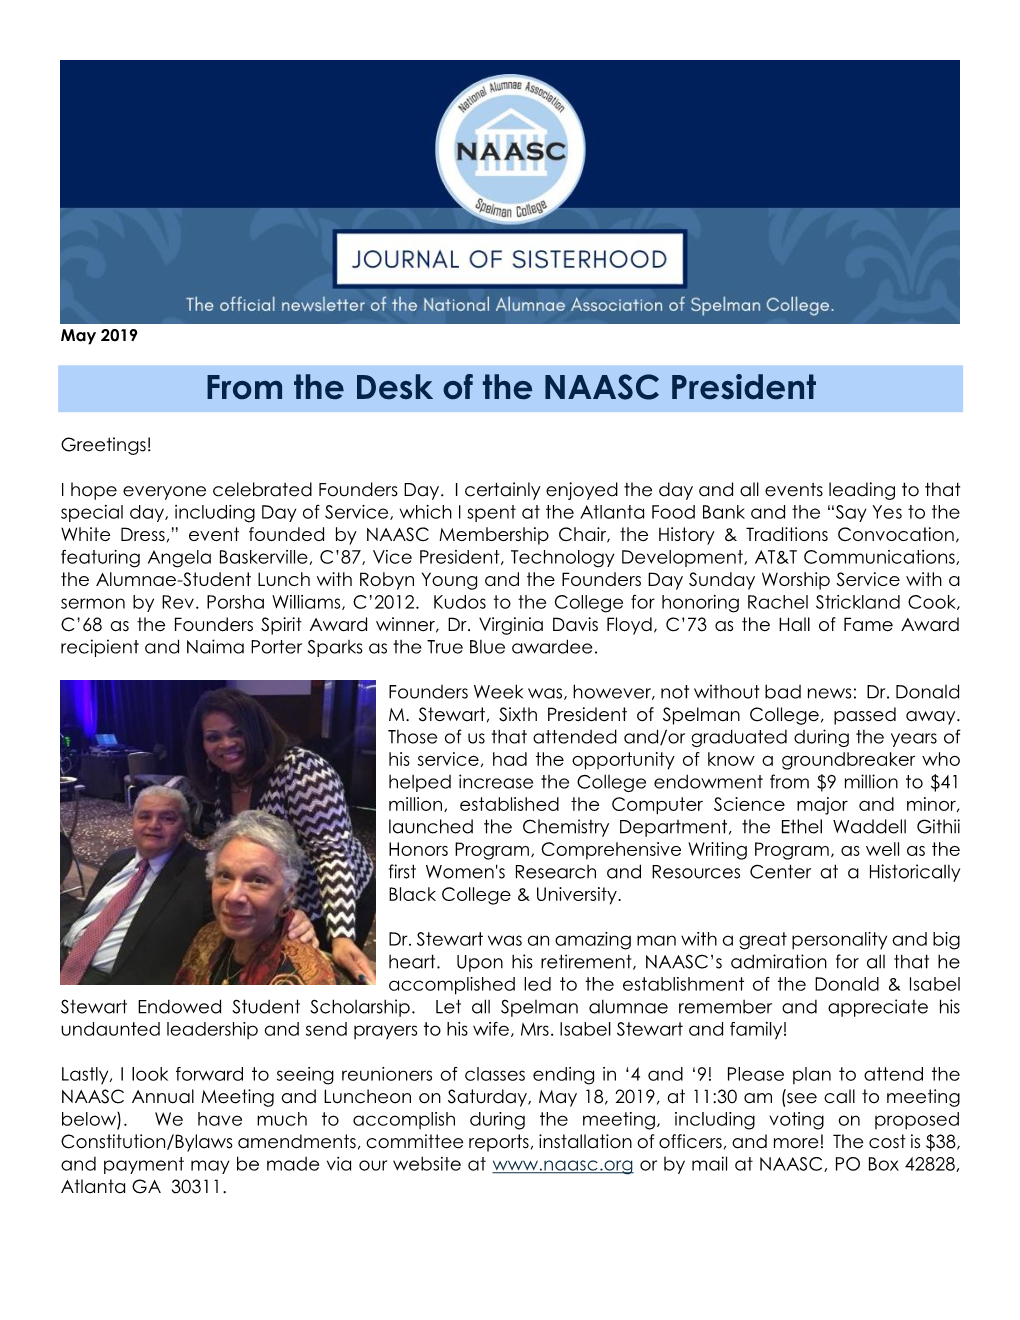 From the Desk of the NAASC President